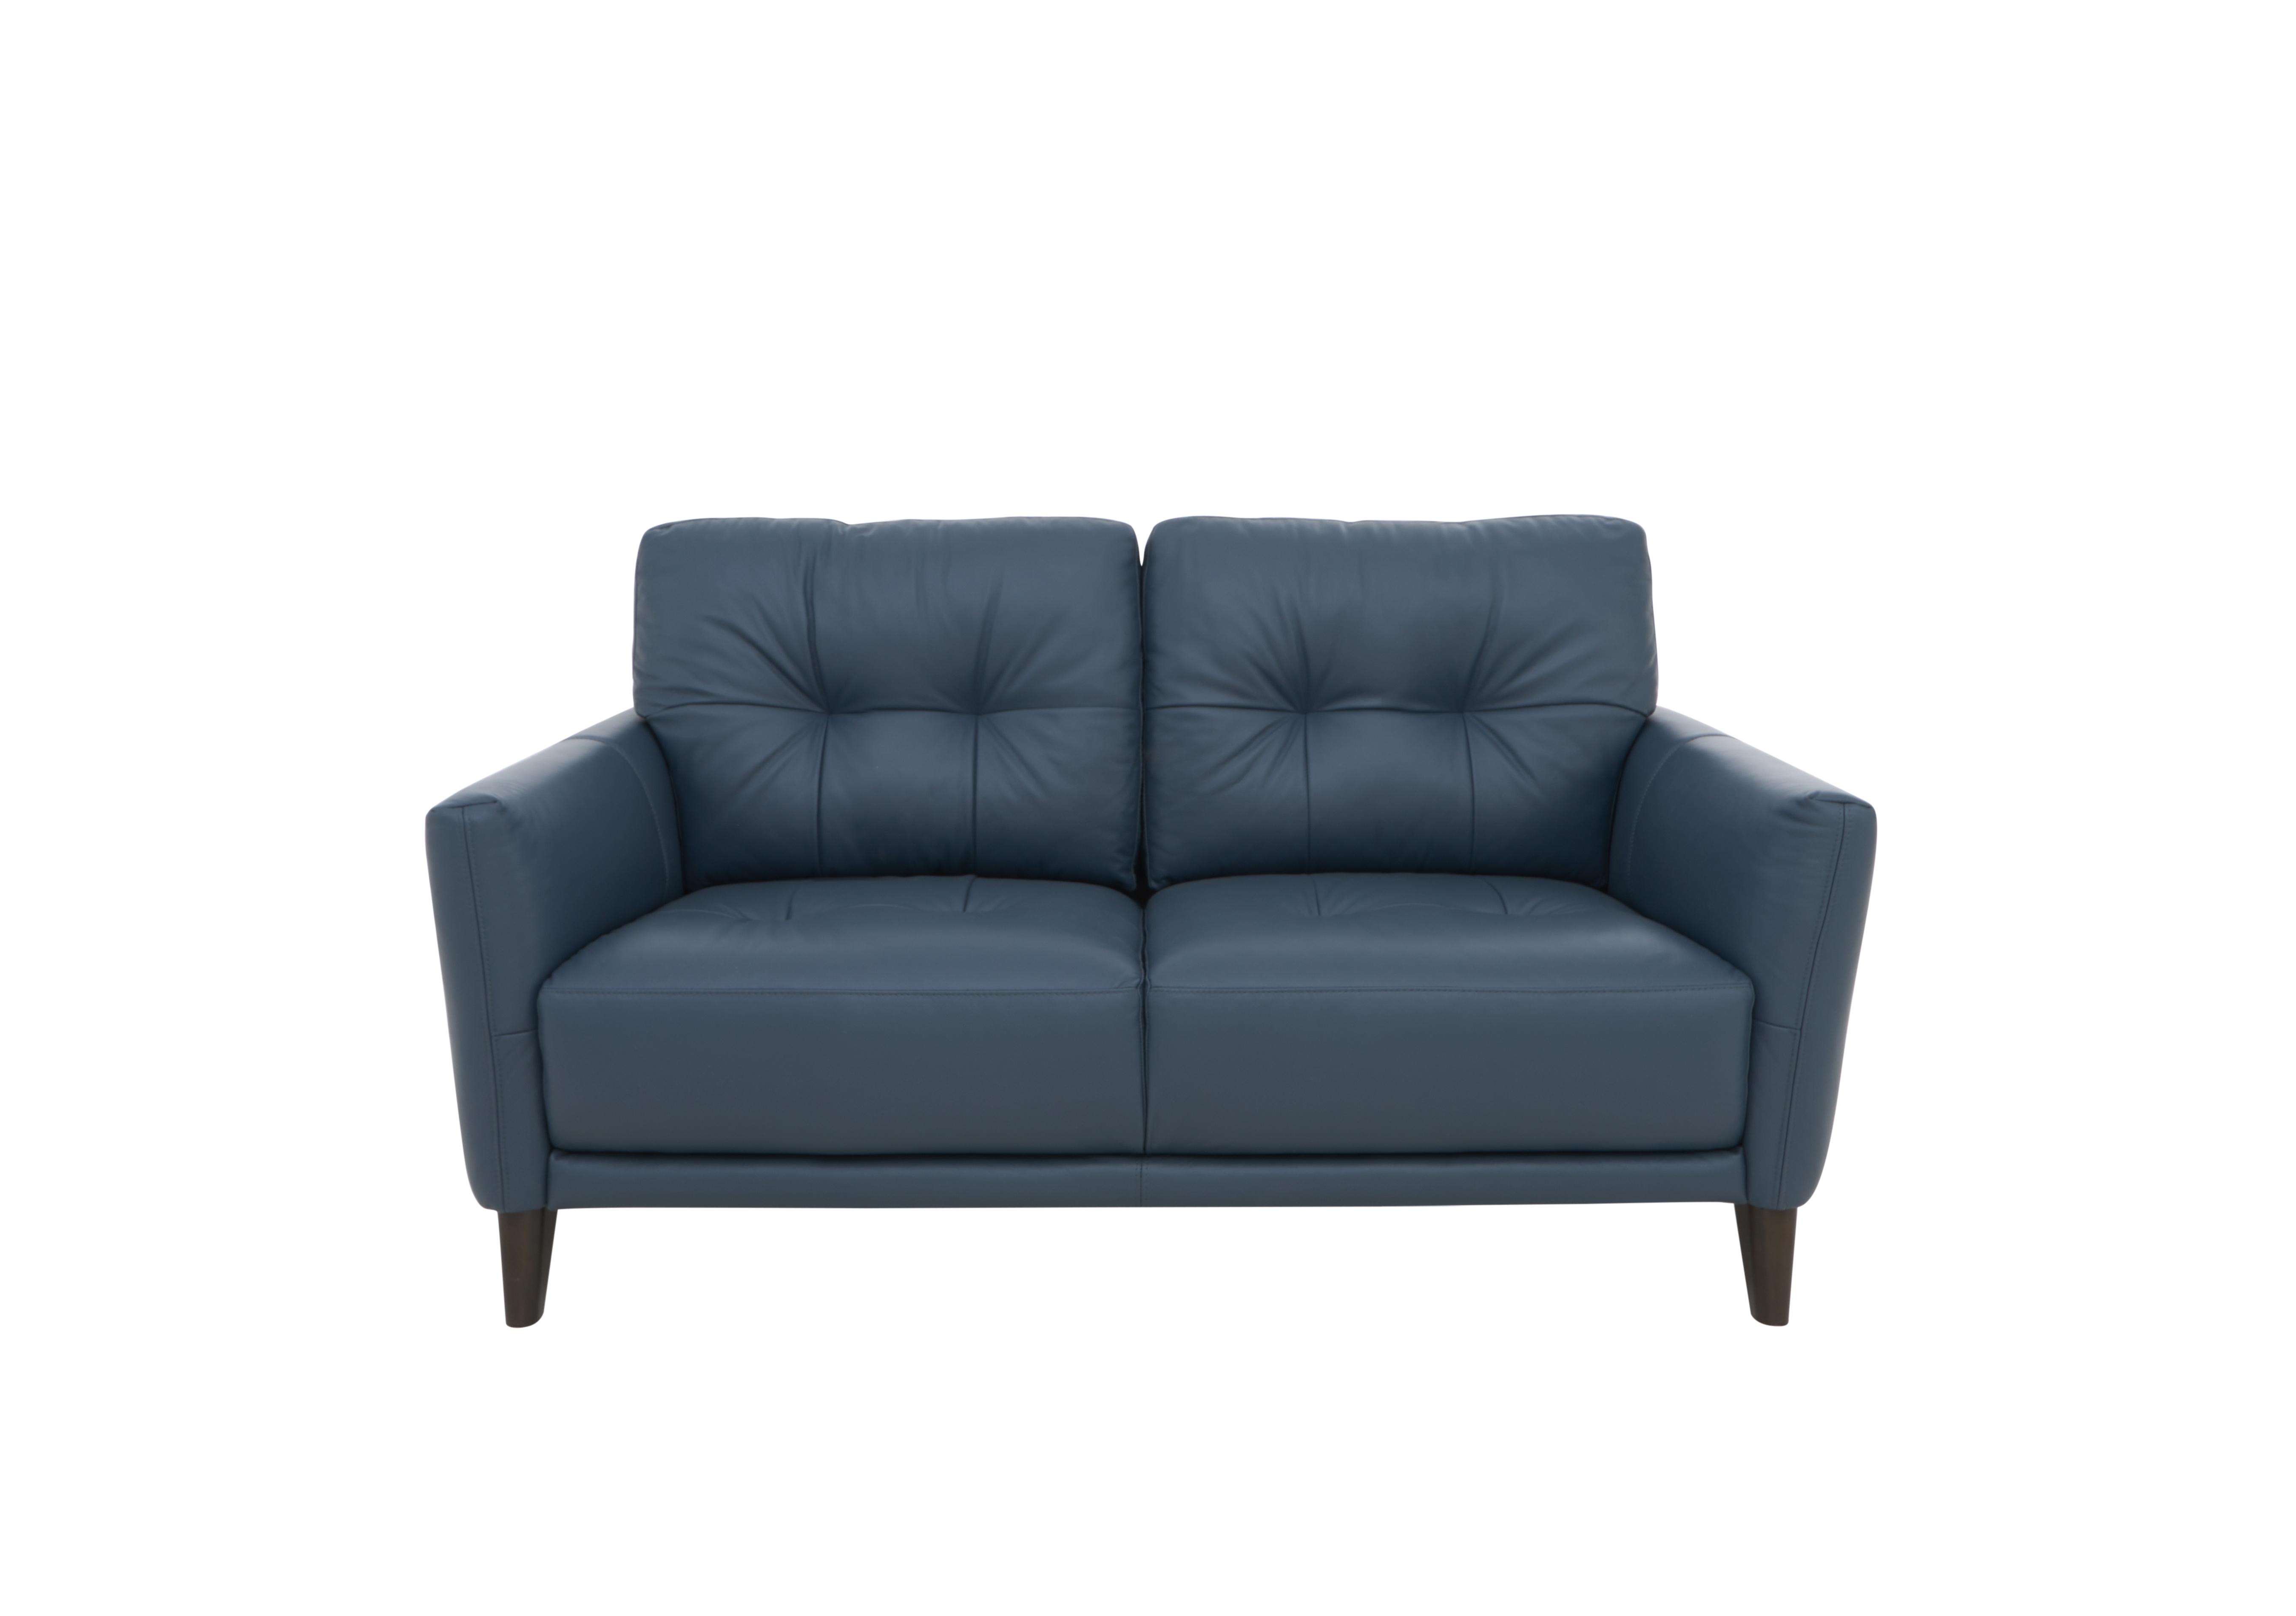 Uno Leather 2 Seater Sofa in Bv-313e Ocean Blue on Furniture Village